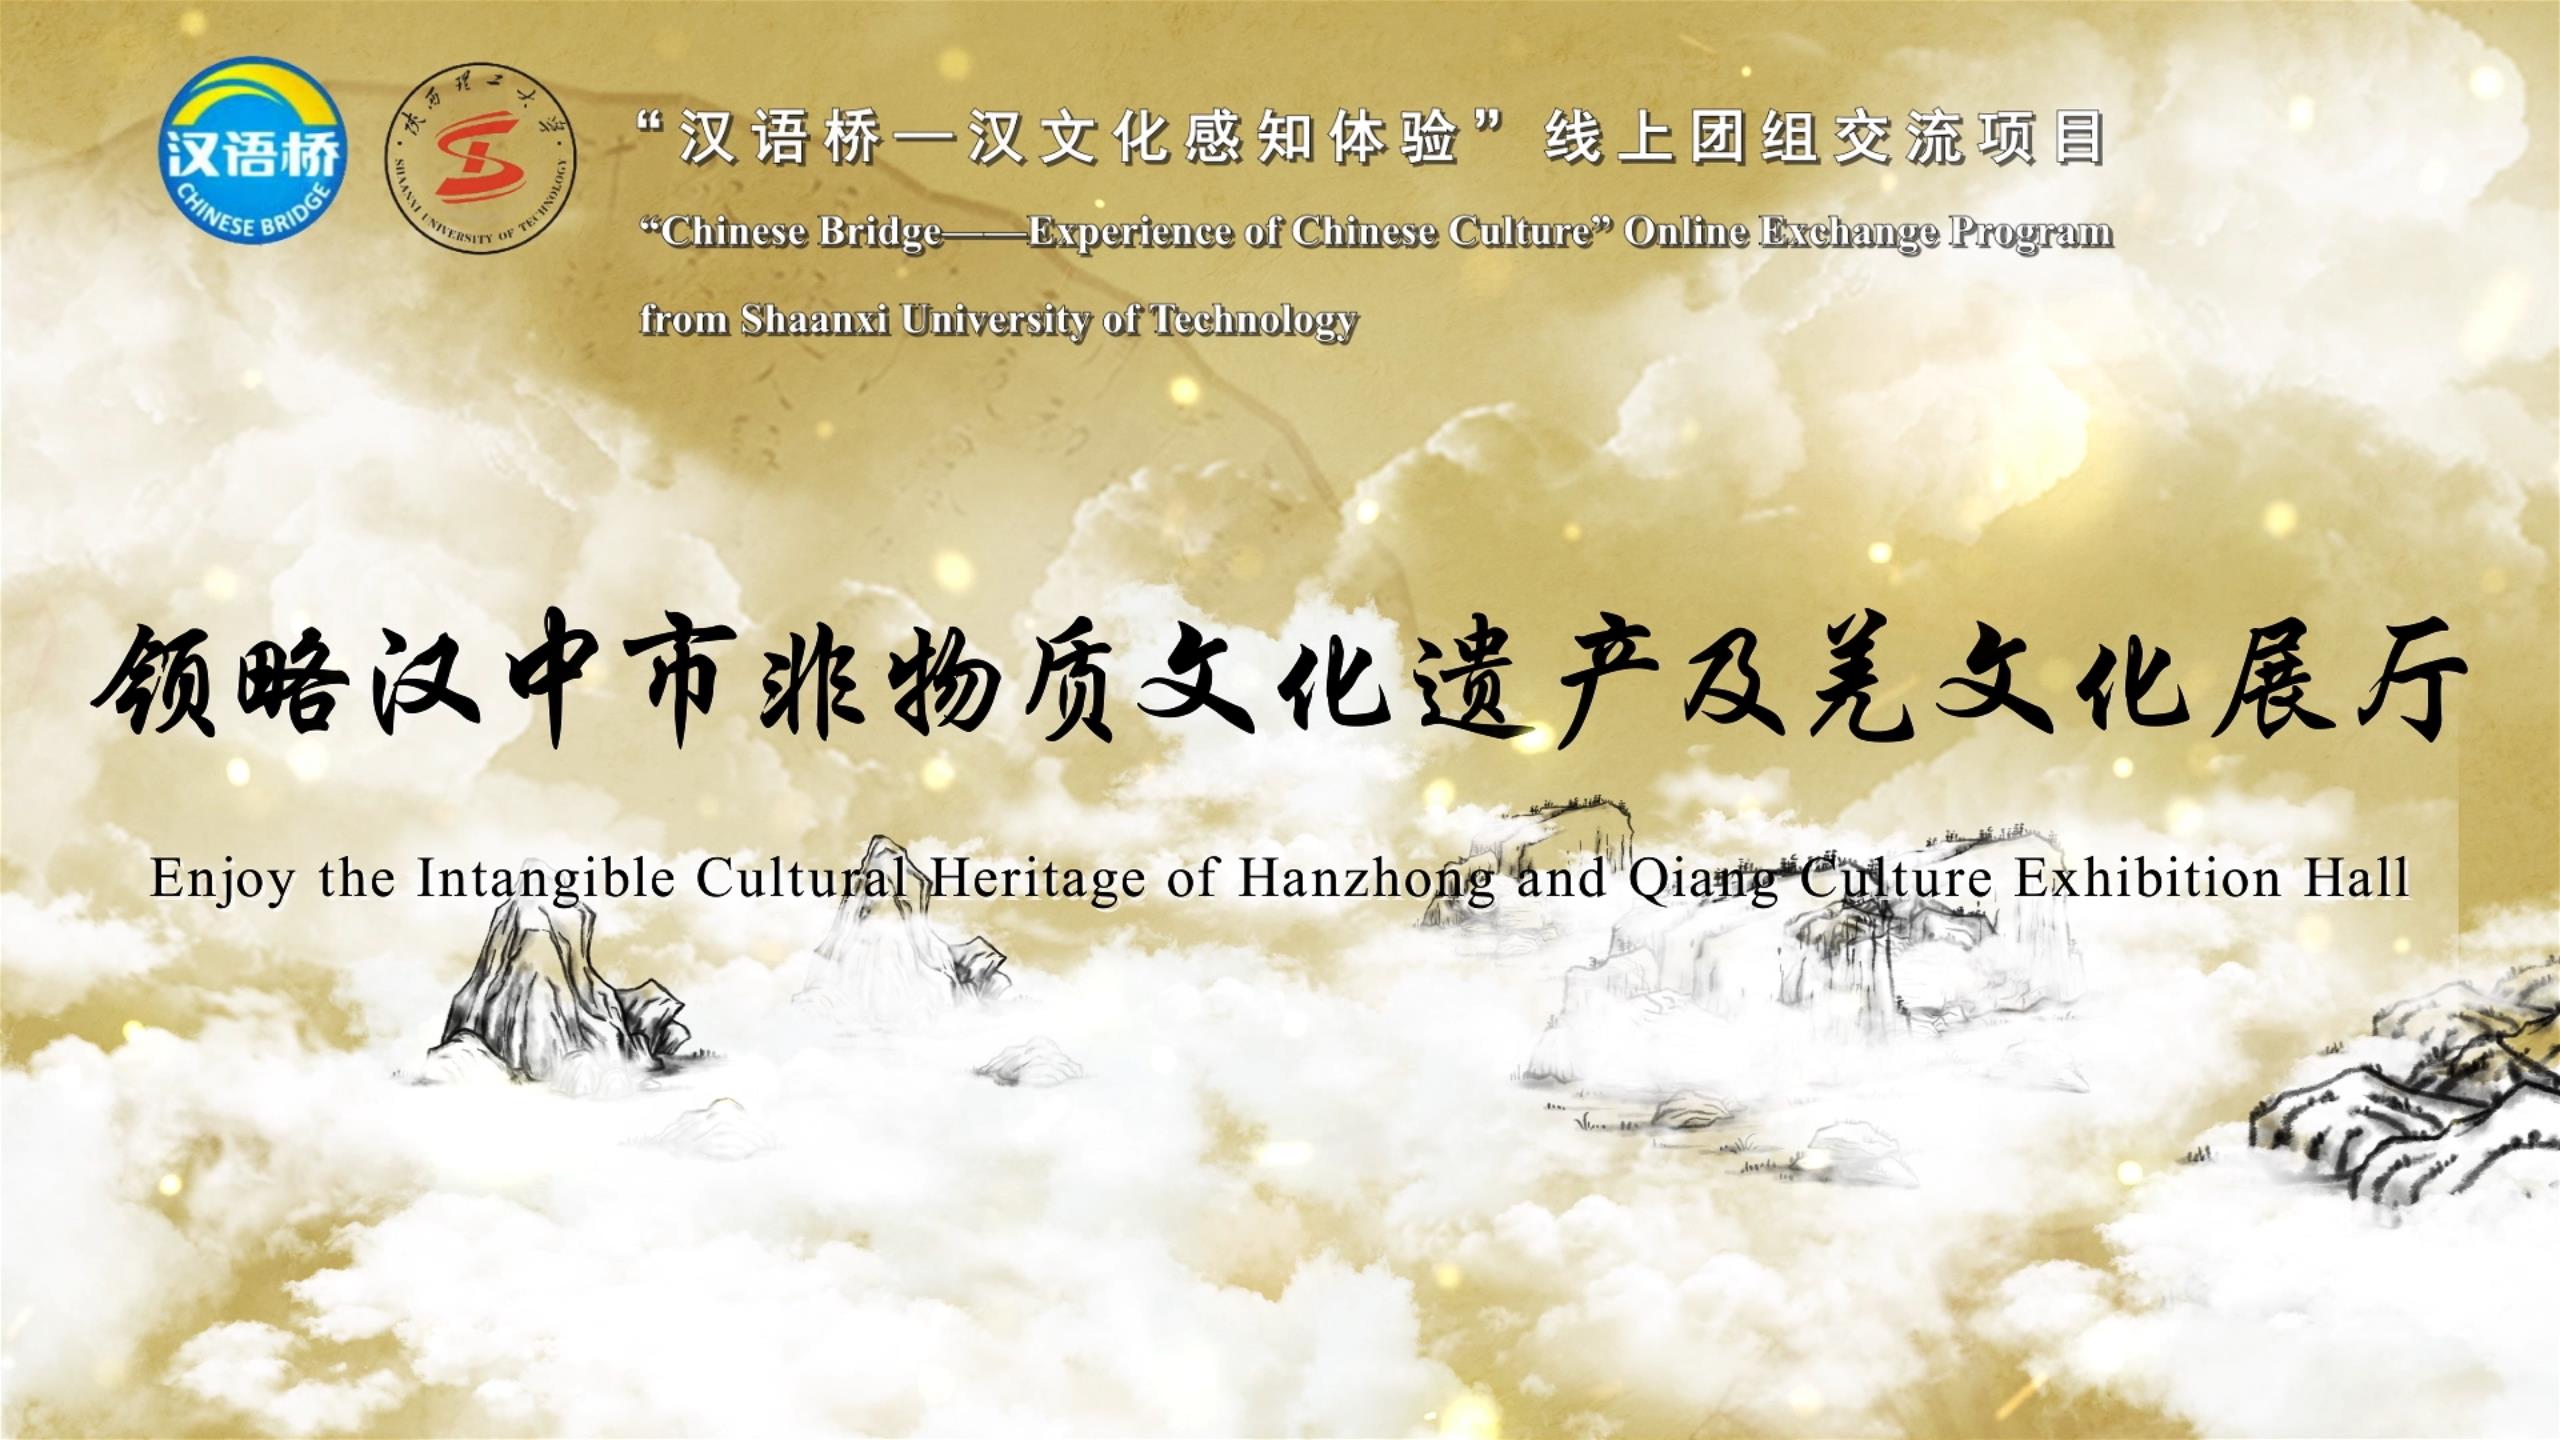 Enjoy the Intangible Cultural Heritage of Hanzhong